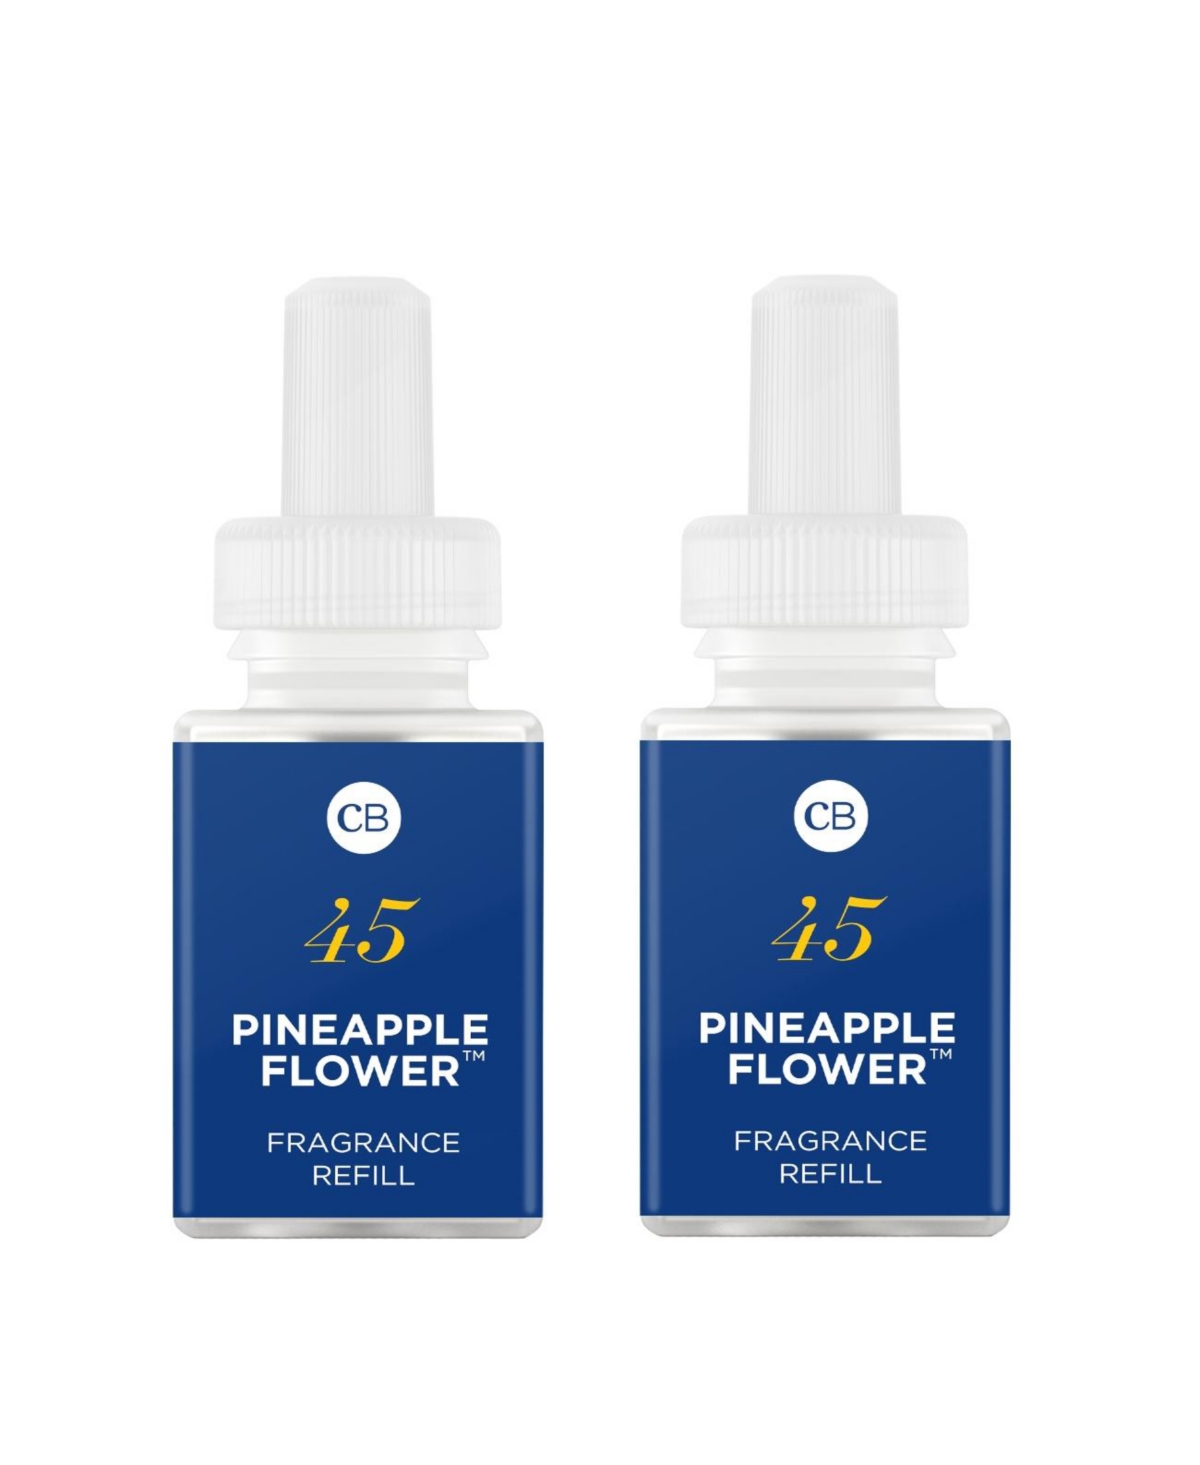 and Capri Blue - Pineapple Flower - Fragrance for Smart Home Air Diffusers - Room Freshener - Aromatherapy Scents for Bedrooms & Living Rooms - 2